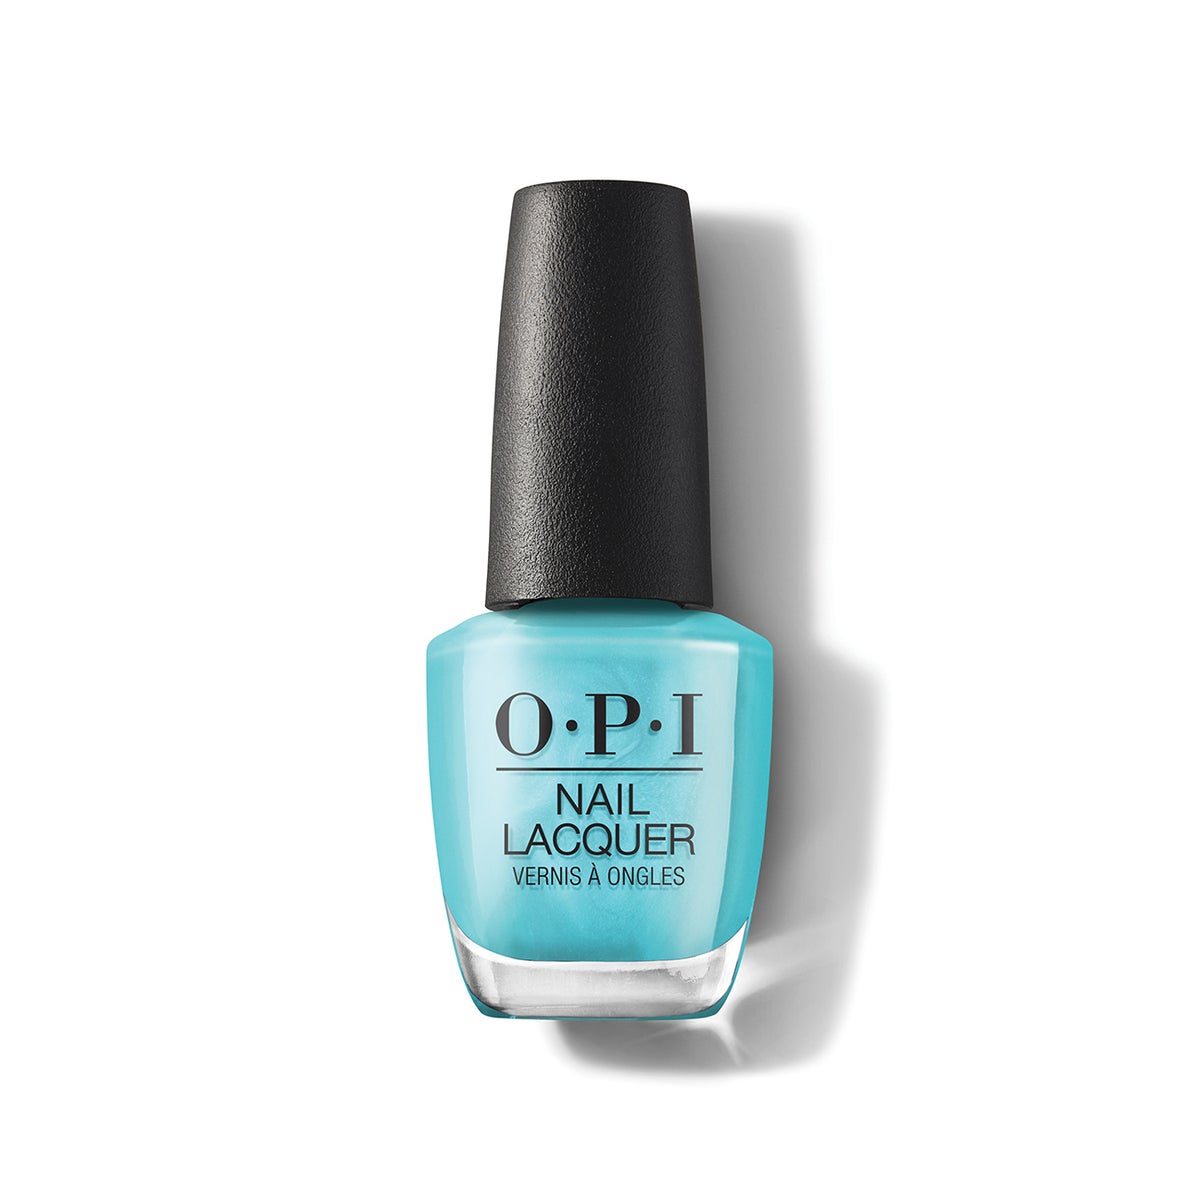 Surfed Naked - OPI Nail Lacquer